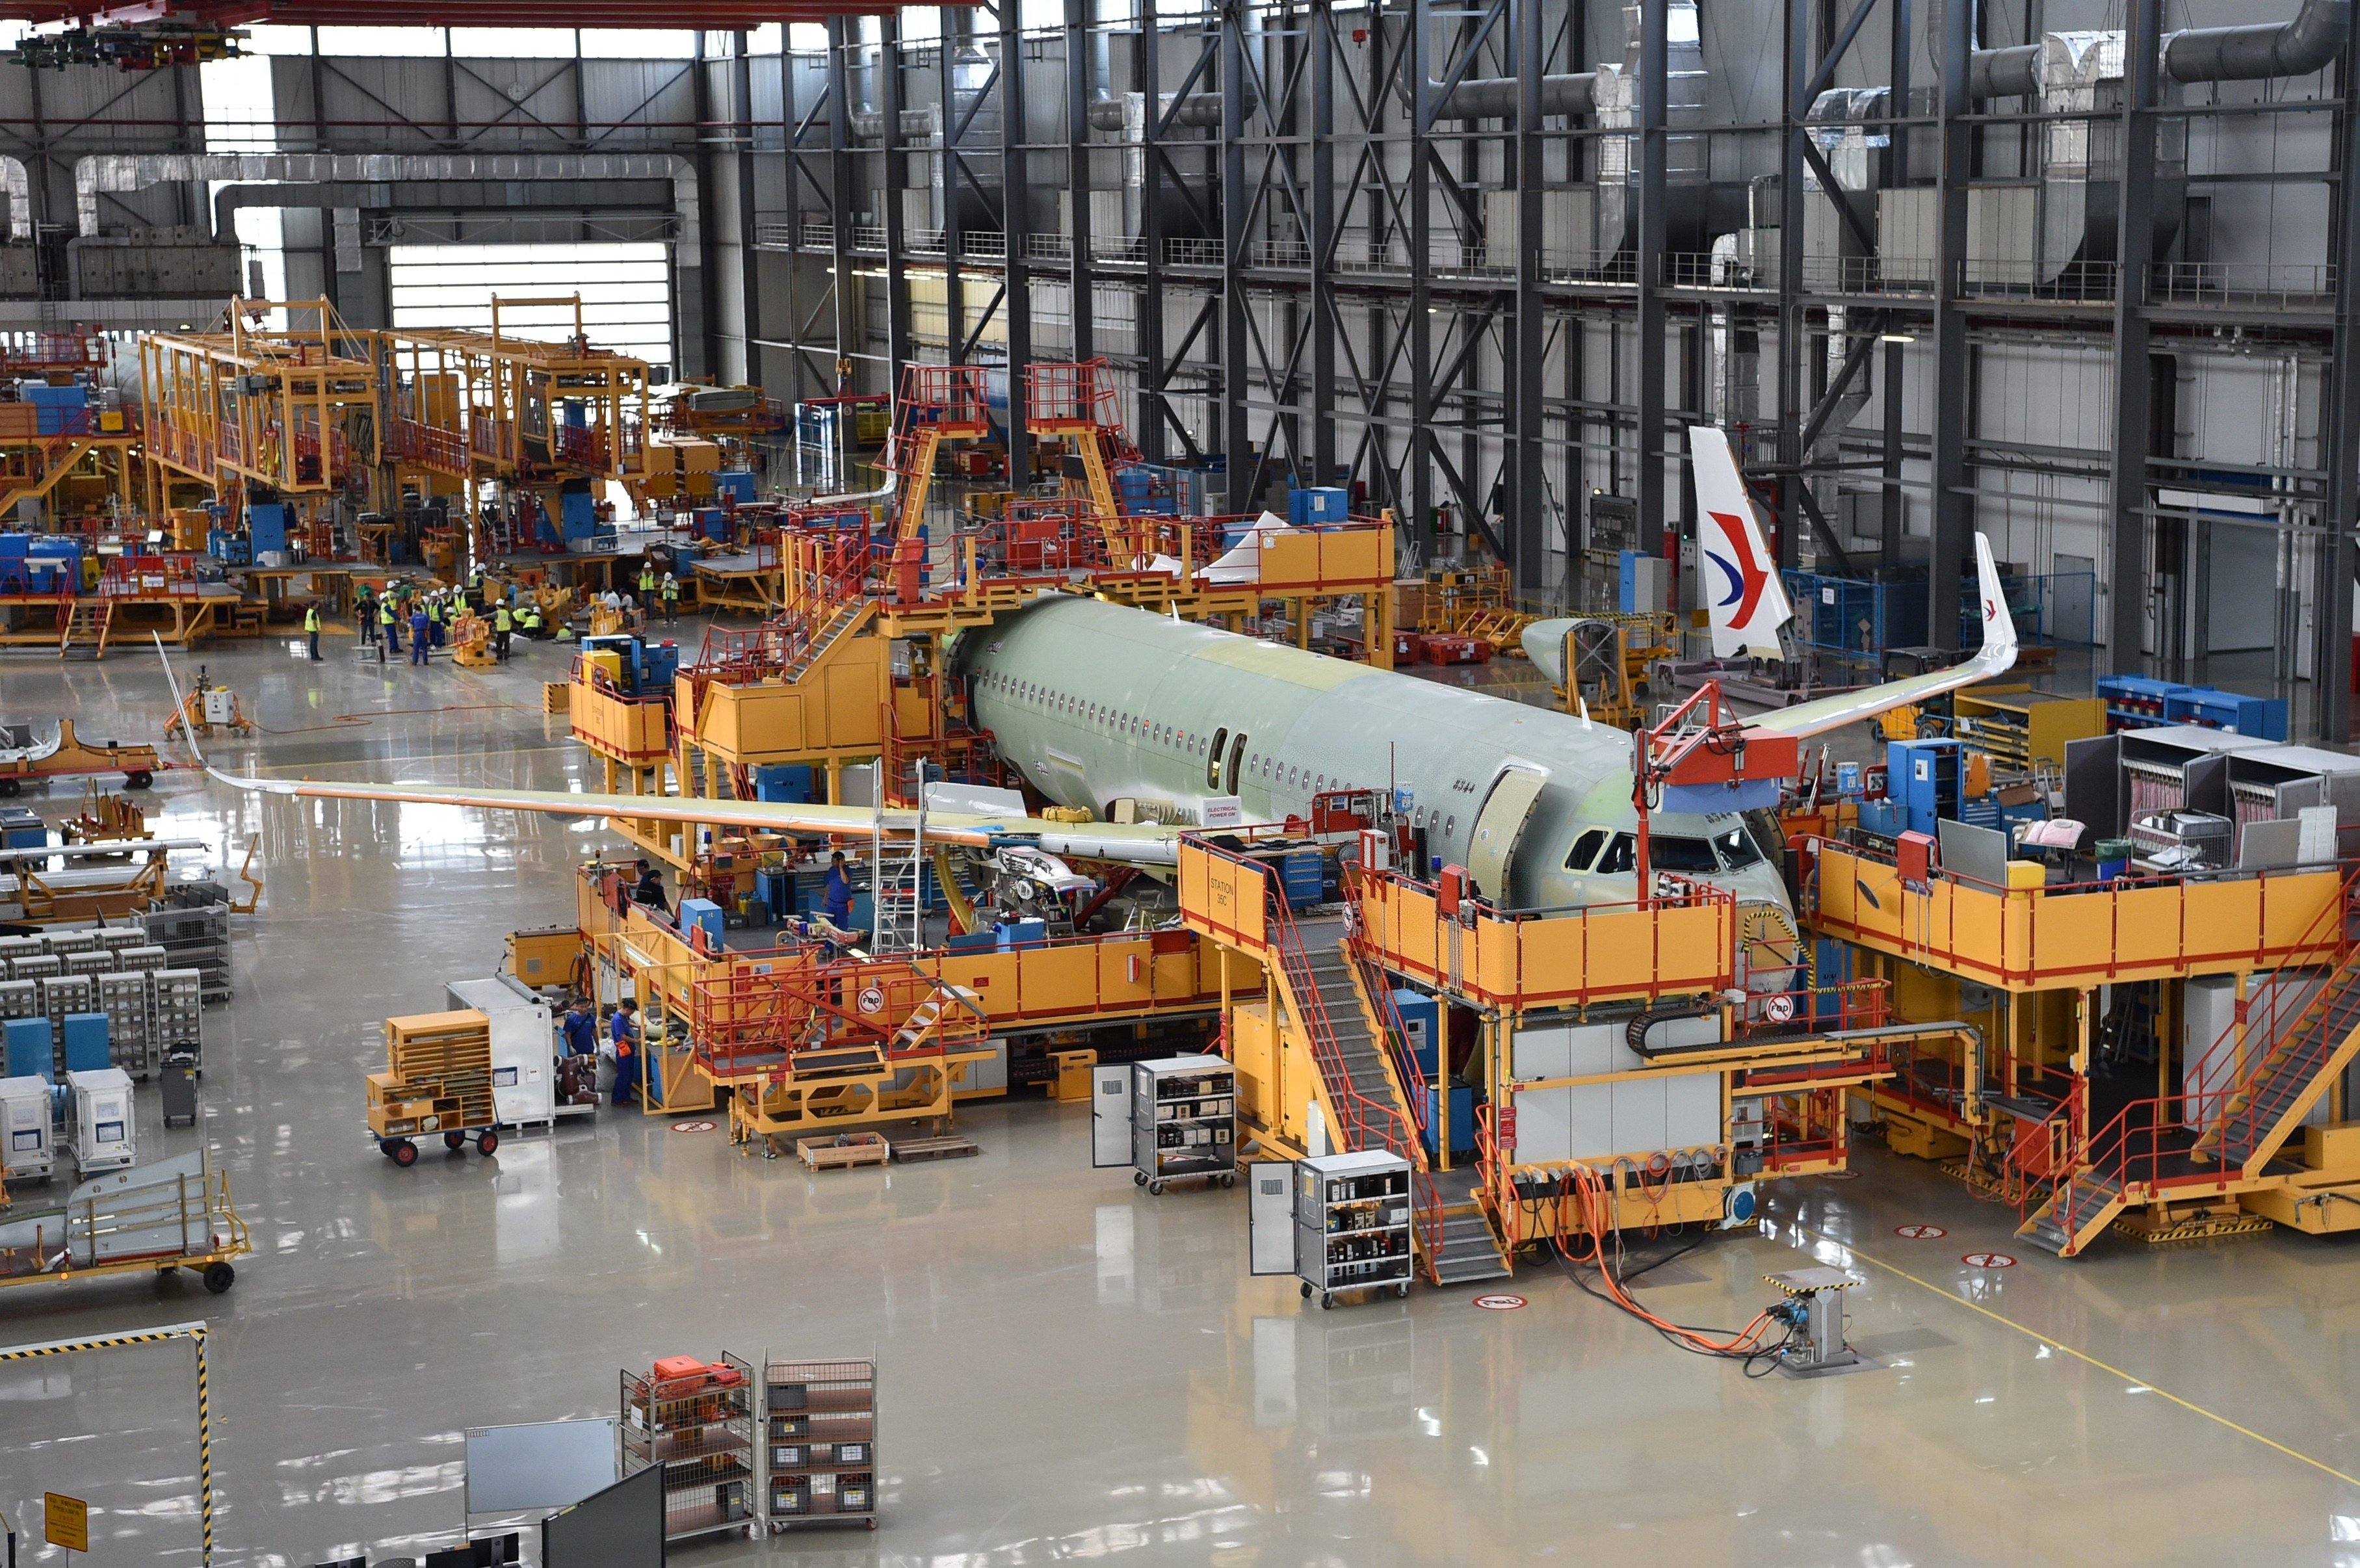 A view of Airbus’ final assembly line for the A320-family of jets in Tianjin on March 8, 2019. Photo: XInhua